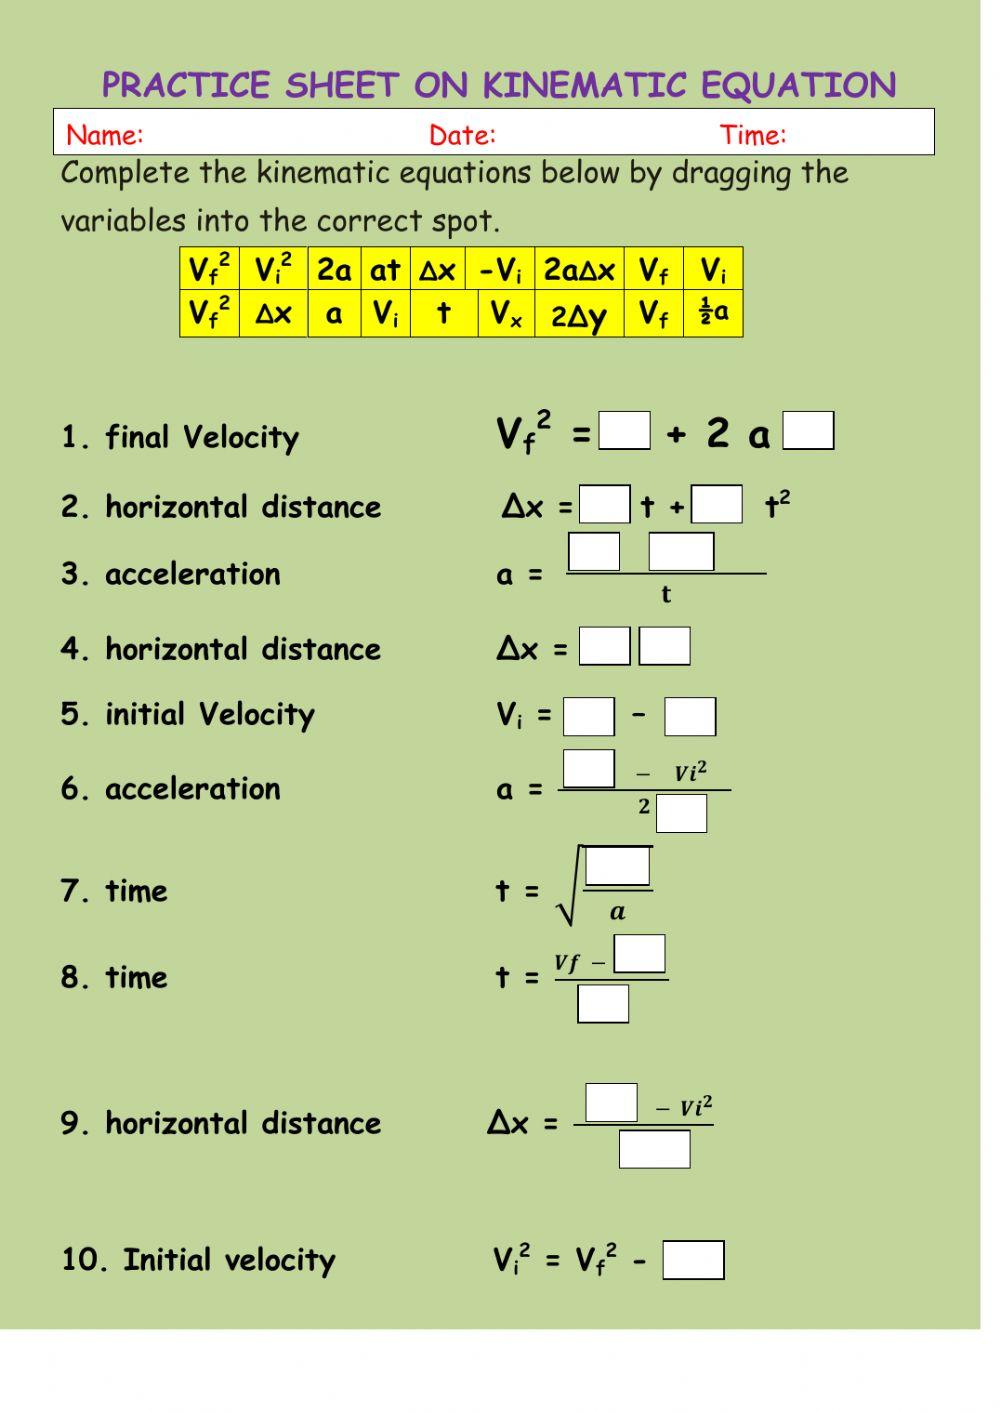 Practice Sheet on Kinematic Equations